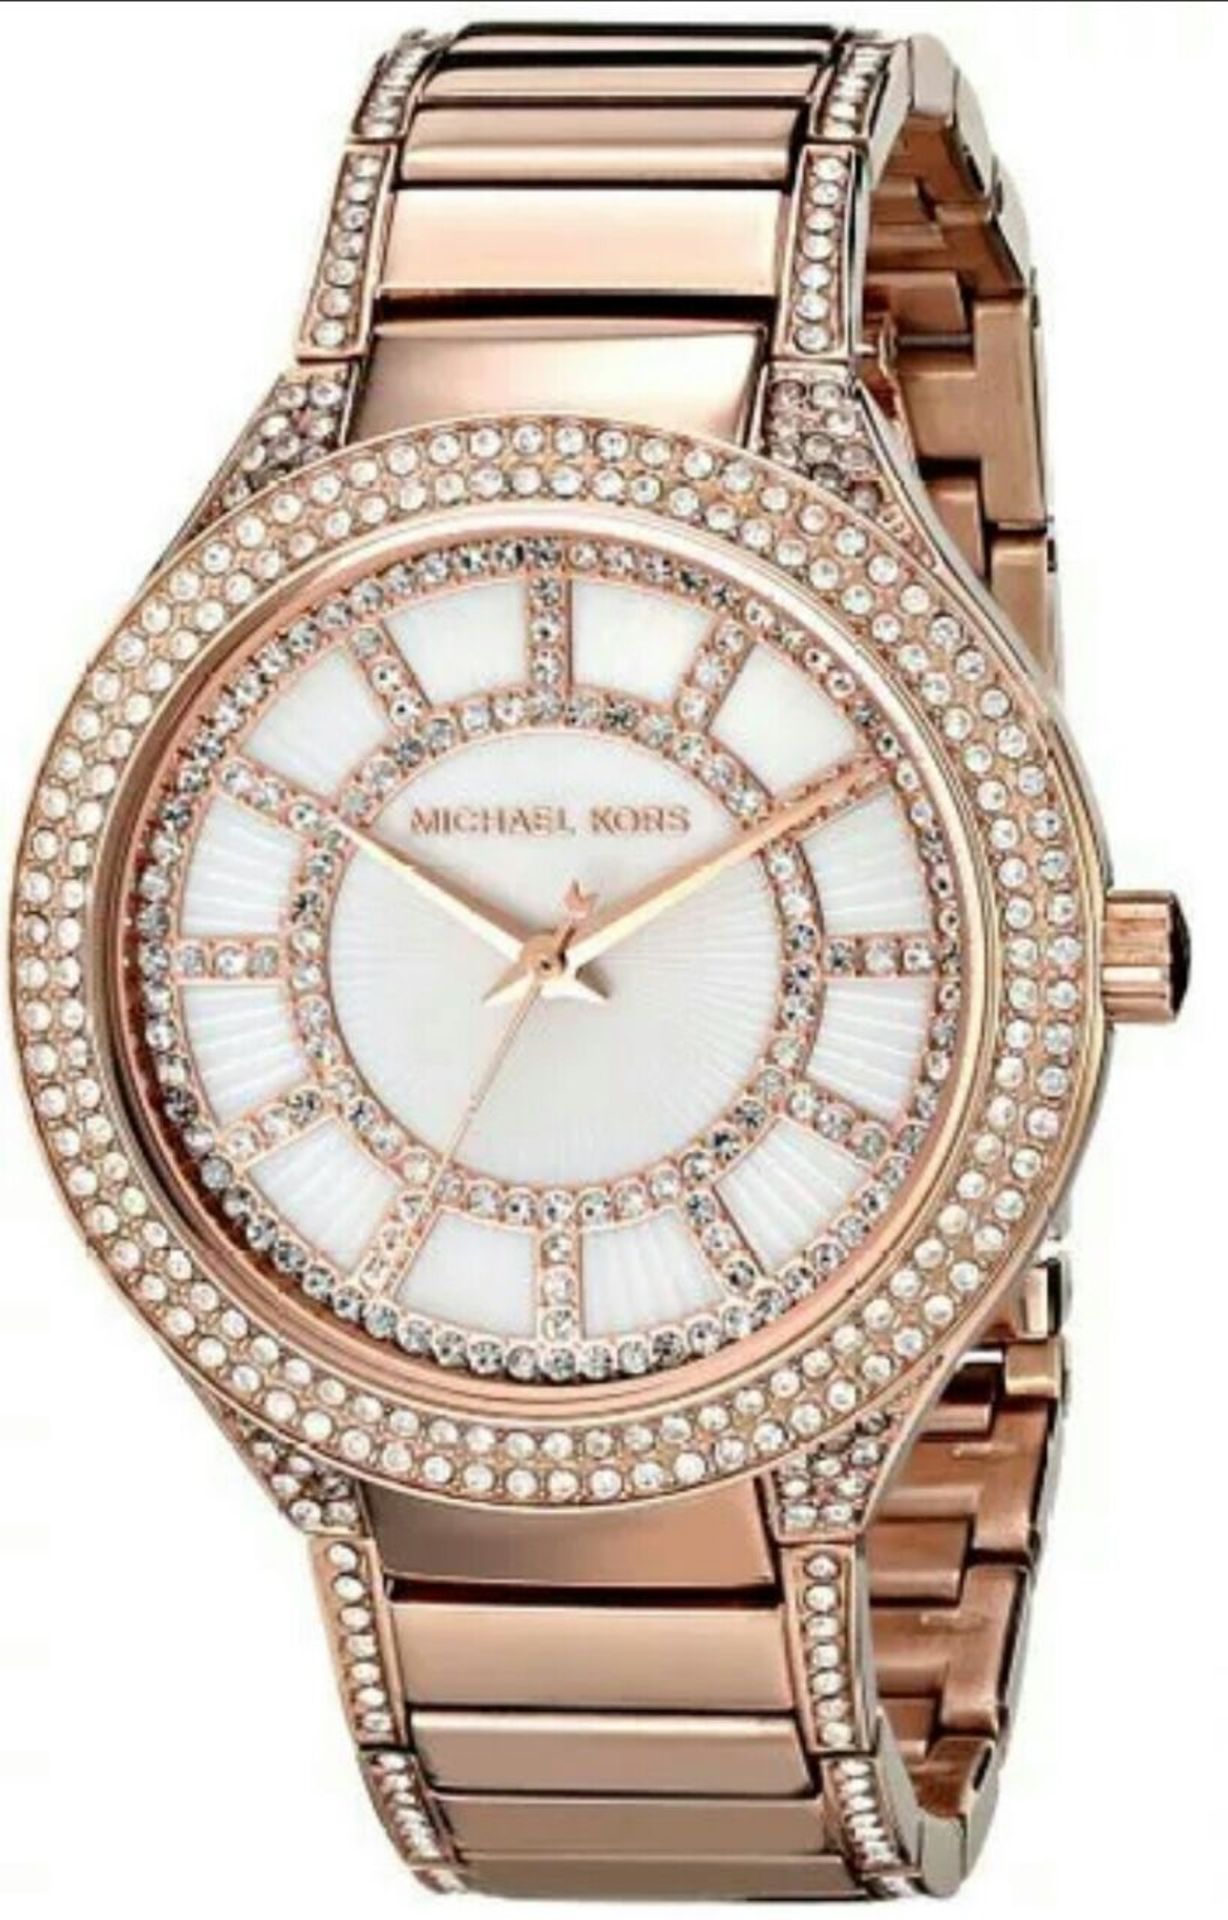 BRAND NEW LADIES MICHAEL KORS WATCH, MK3313, COMPLETE WITH ORIGINAL BOX AND MANUAL - RRP £399